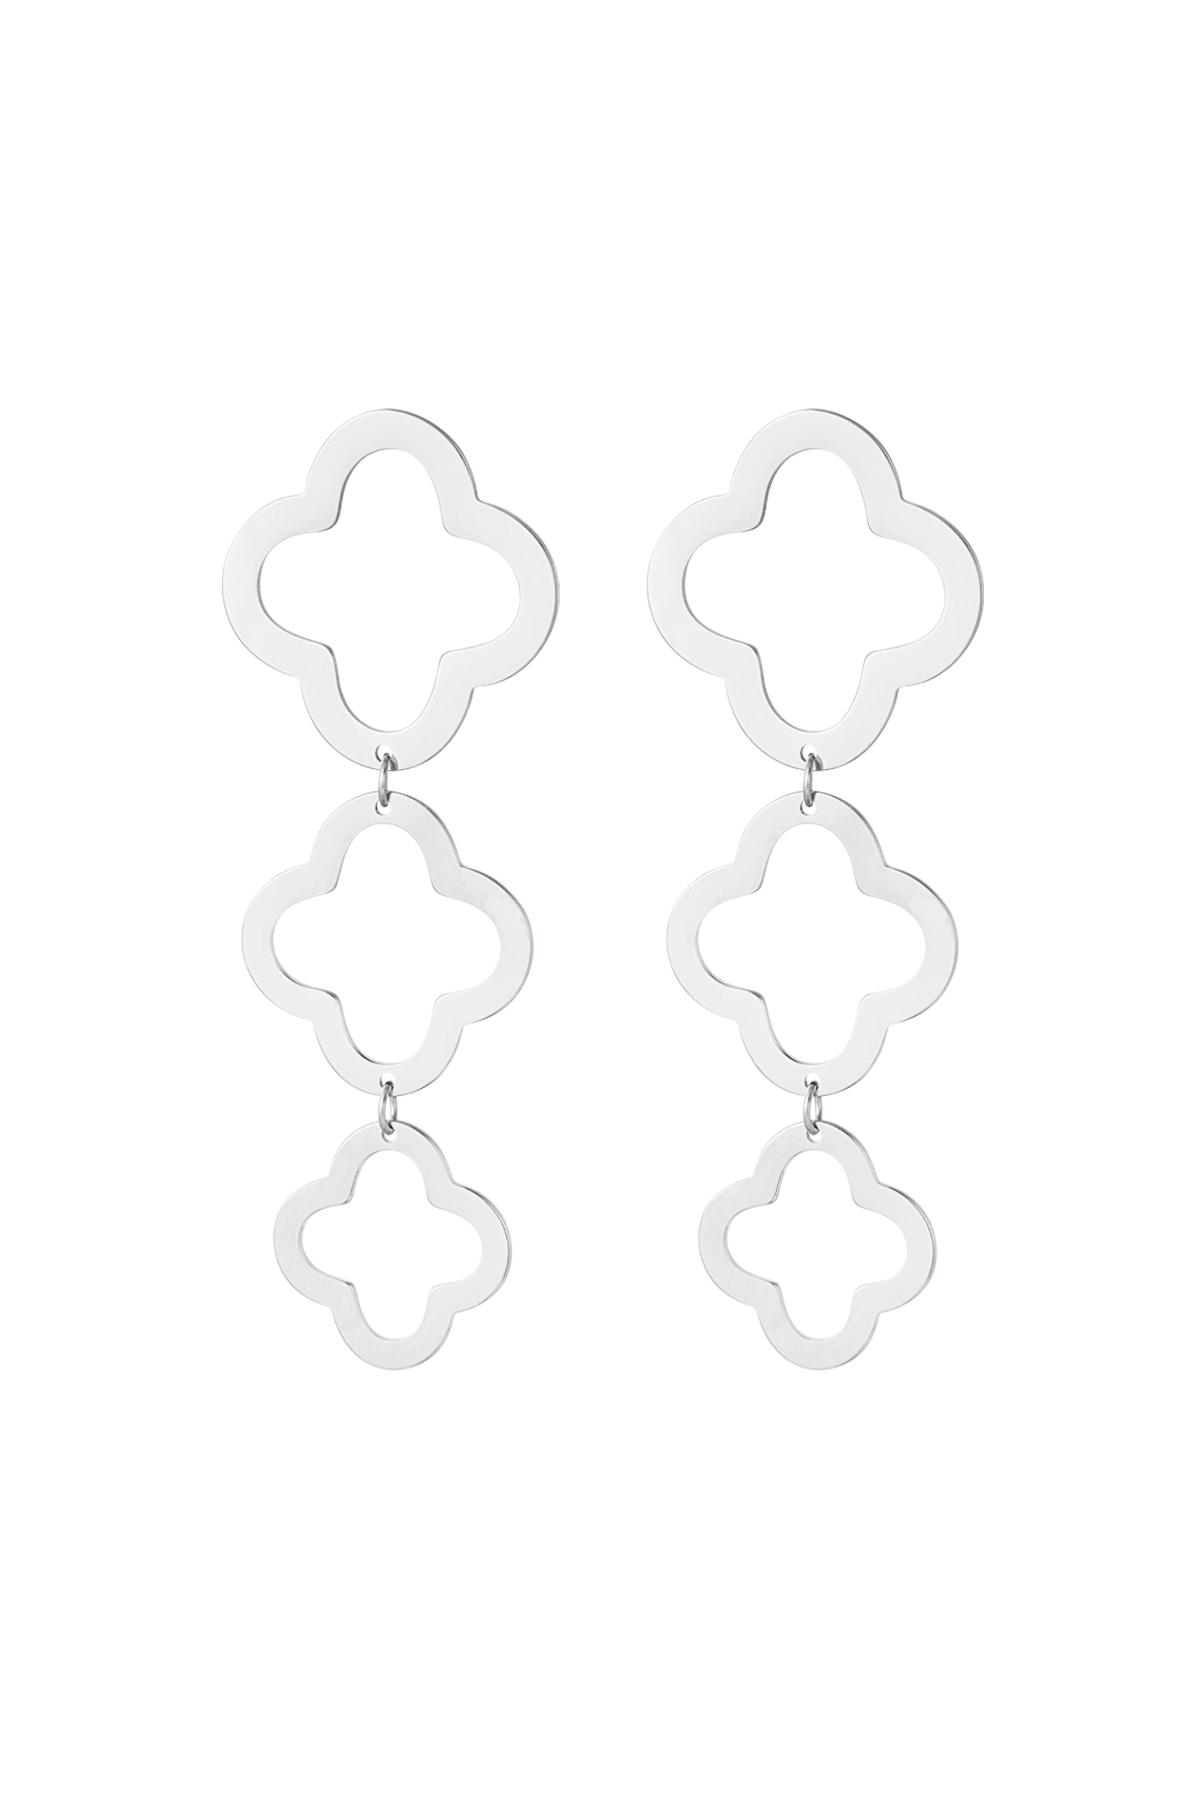 Statement earrings clovers Silver Stainless Steel 